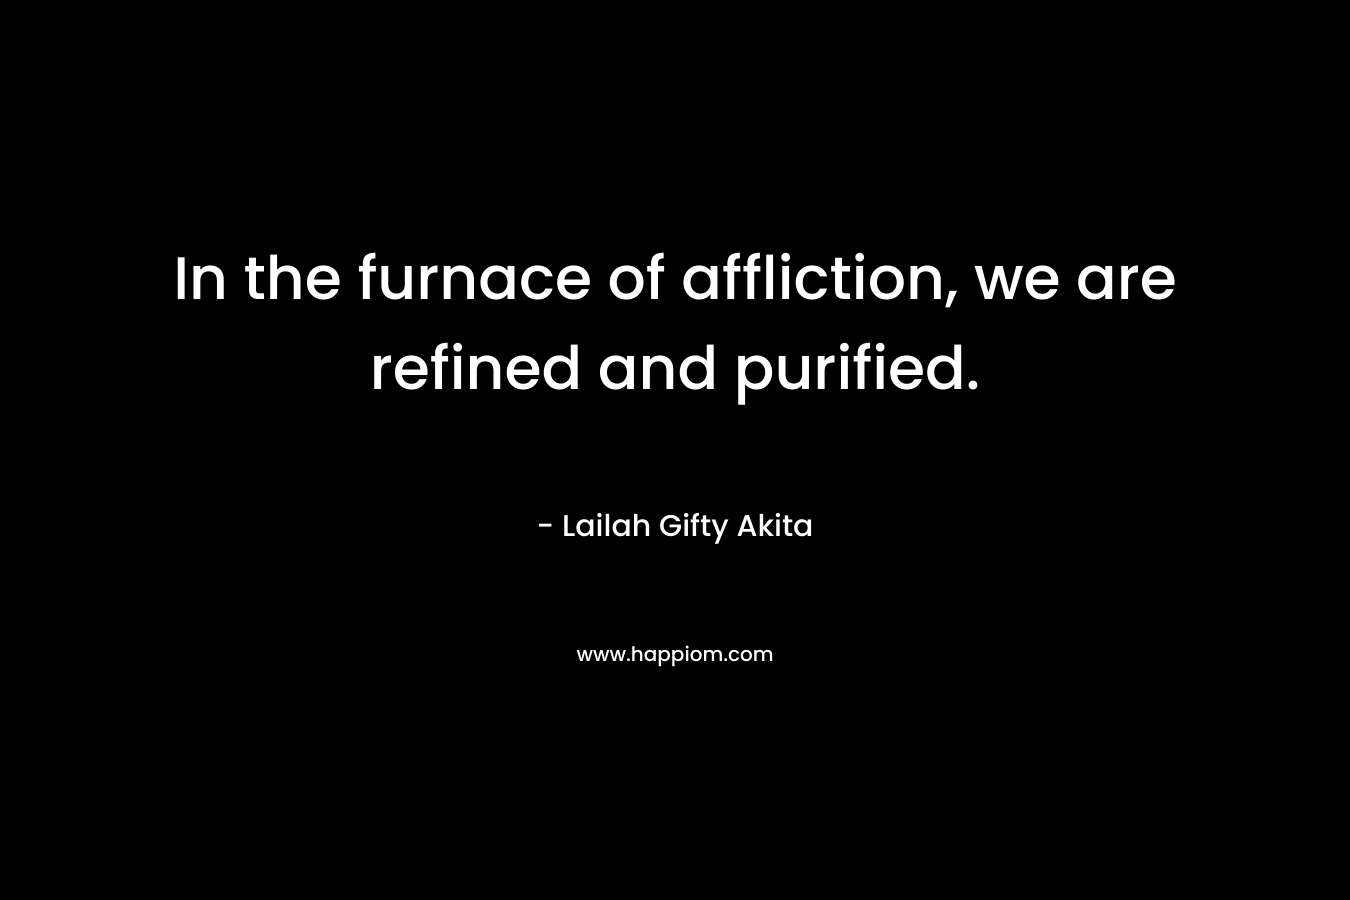 In the furnace of affliction, we are refined and purified. – Lailah Gifty Akita